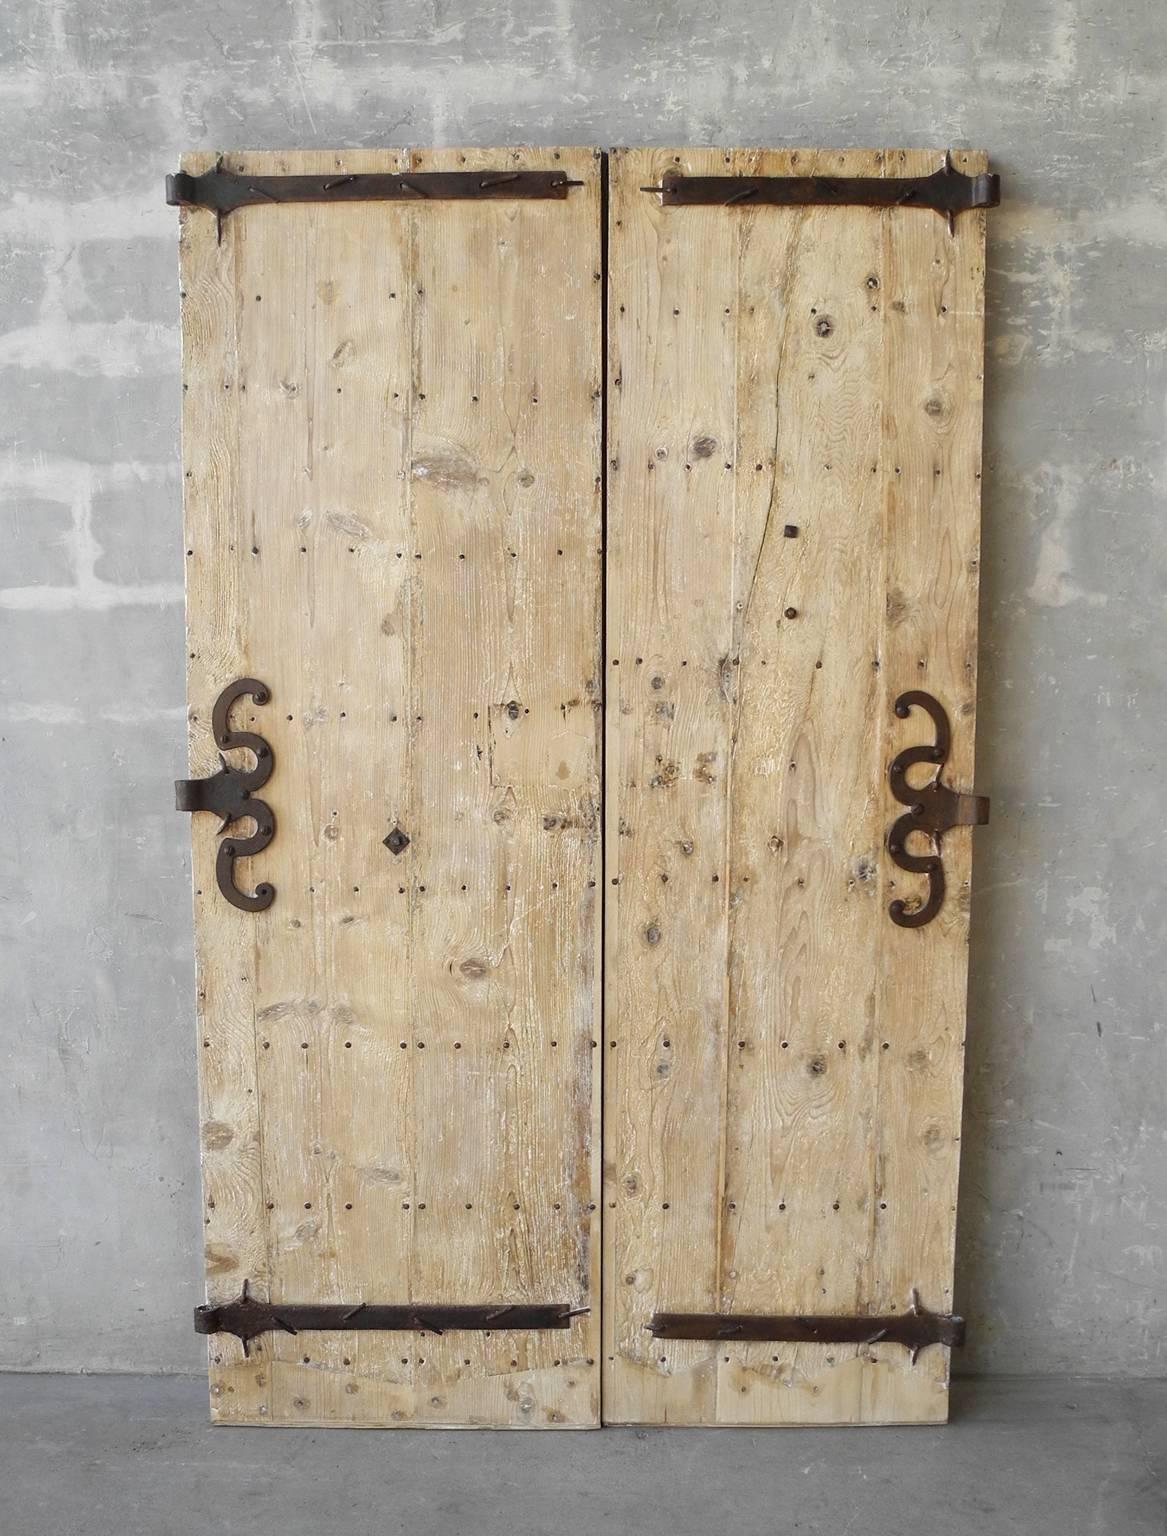 This is a simply beautiful pair of 18th century entrance doors from a property in St. Marcellin, a town in the Rhone-Alpes region of France. These doors include original hardware that has been refurbished, making for special iron detailing all